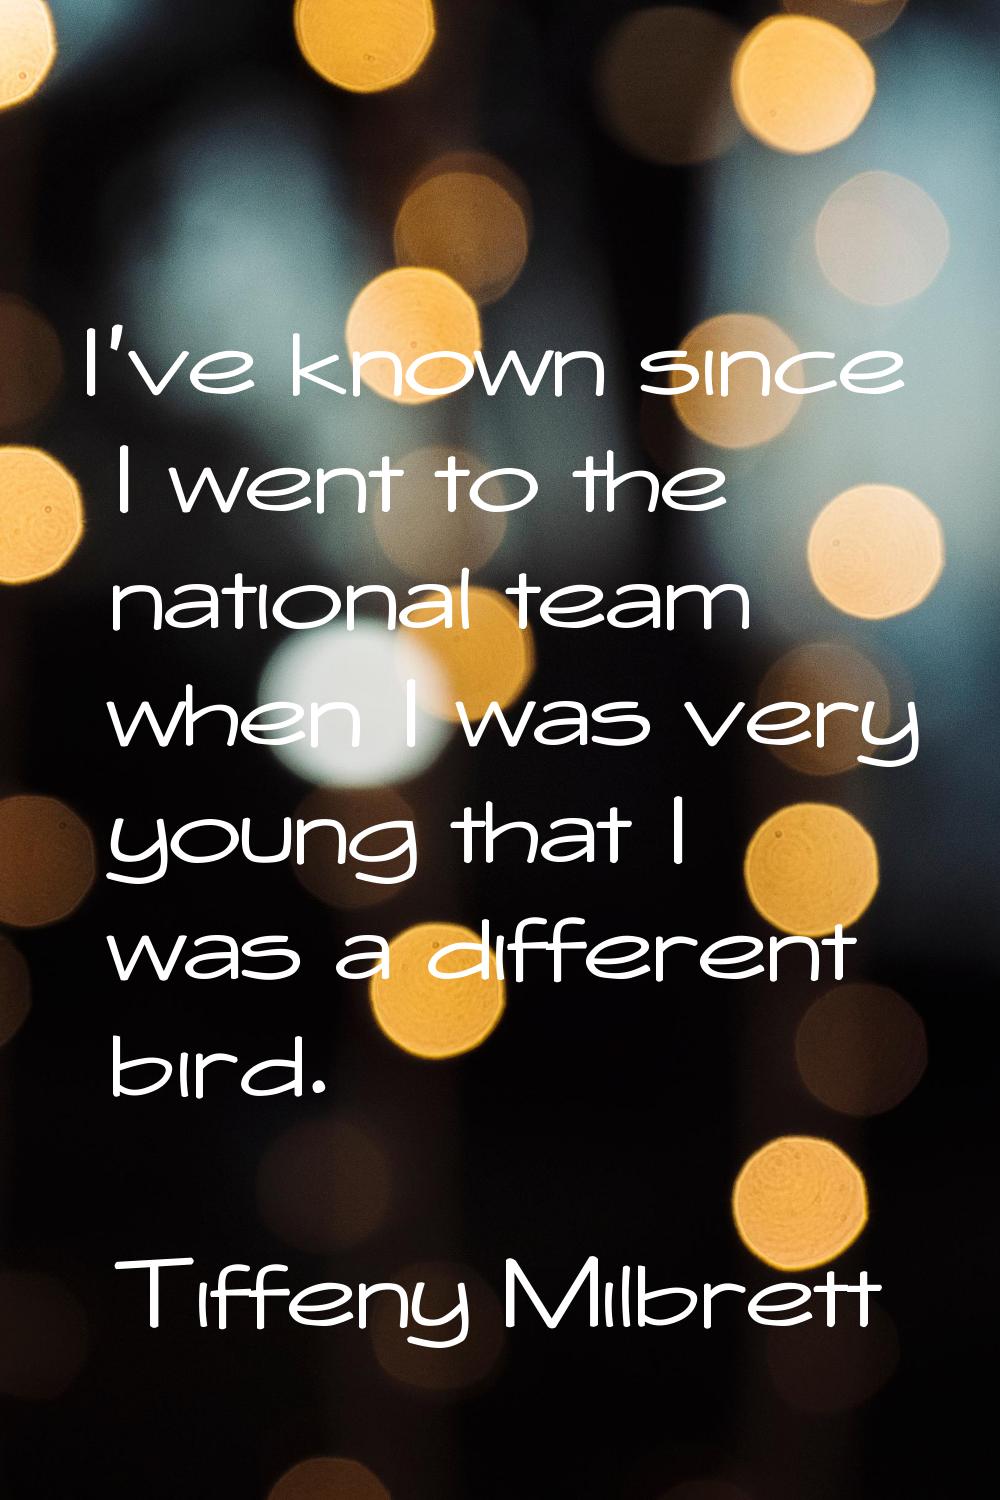 I've known since I went to the national team when I was very young that I was a different bird.